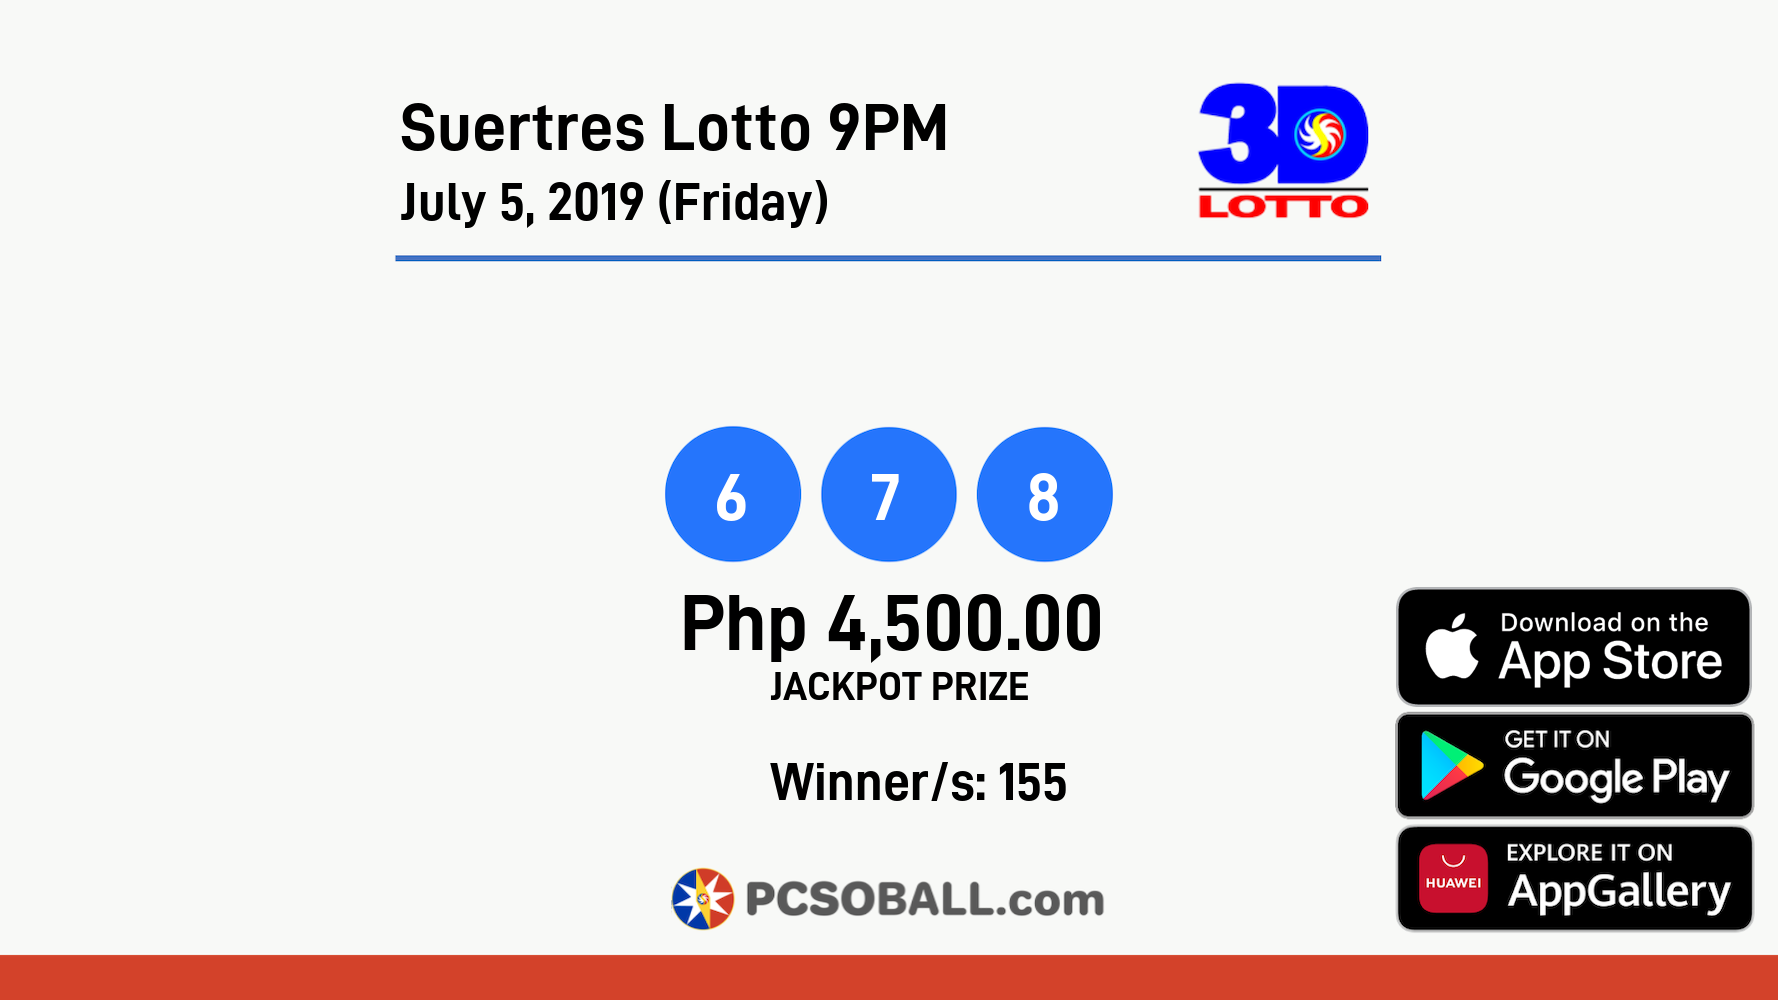 Suertres Lotto 9PM July 5, 2019 (Friday) Result